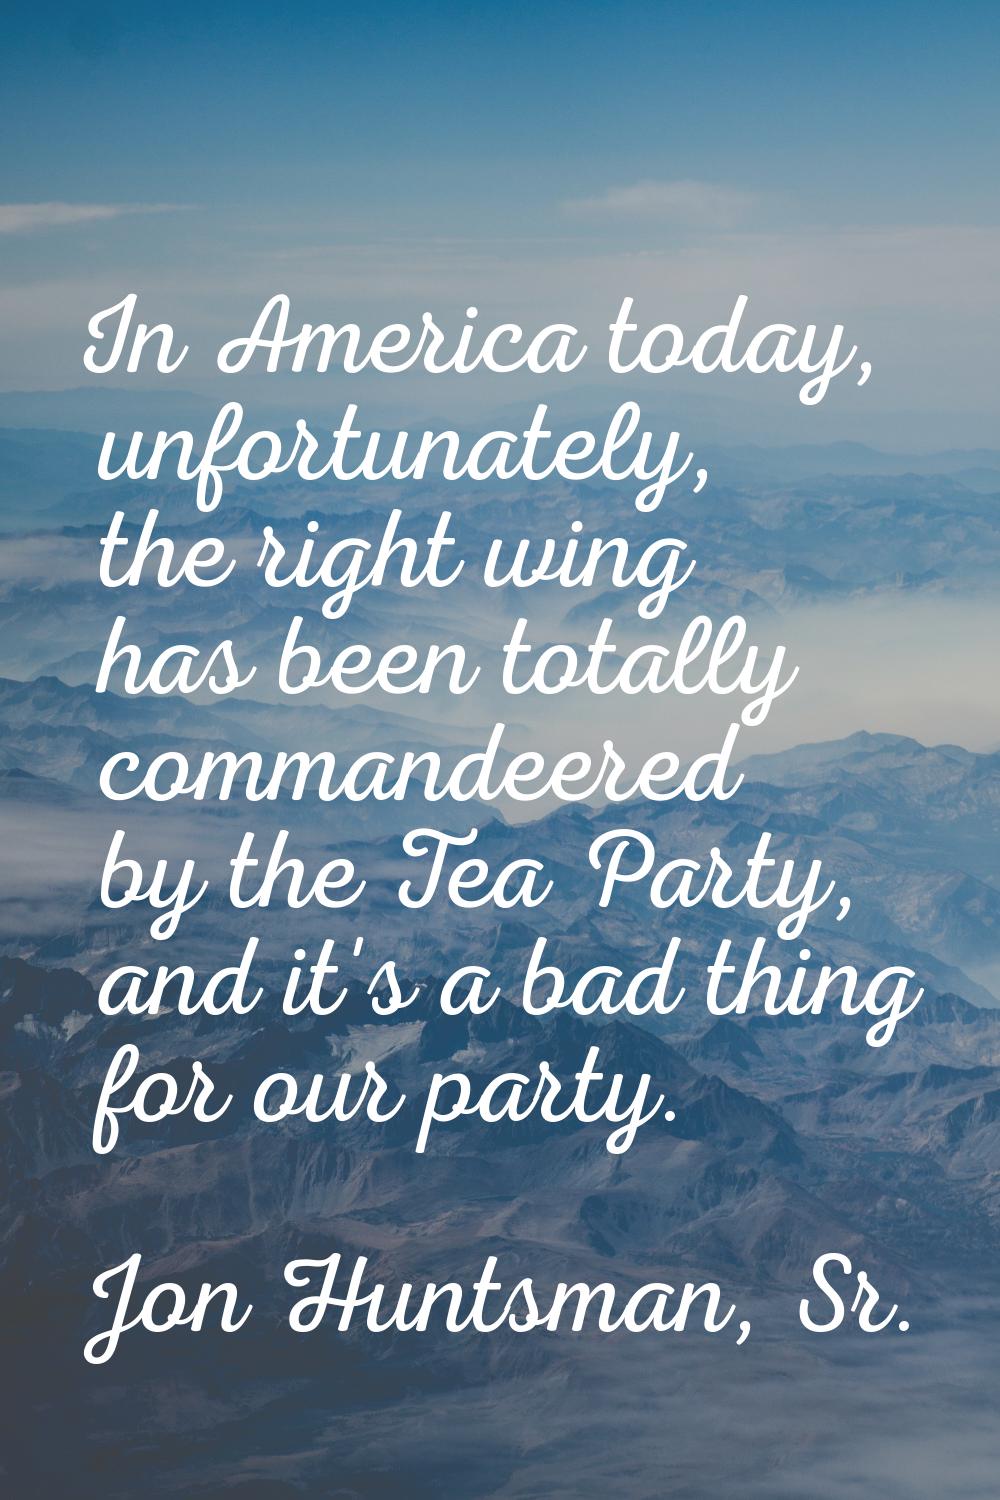 In America today, unfortunately, the right wing has been totally commandeered by the Tea Party, and